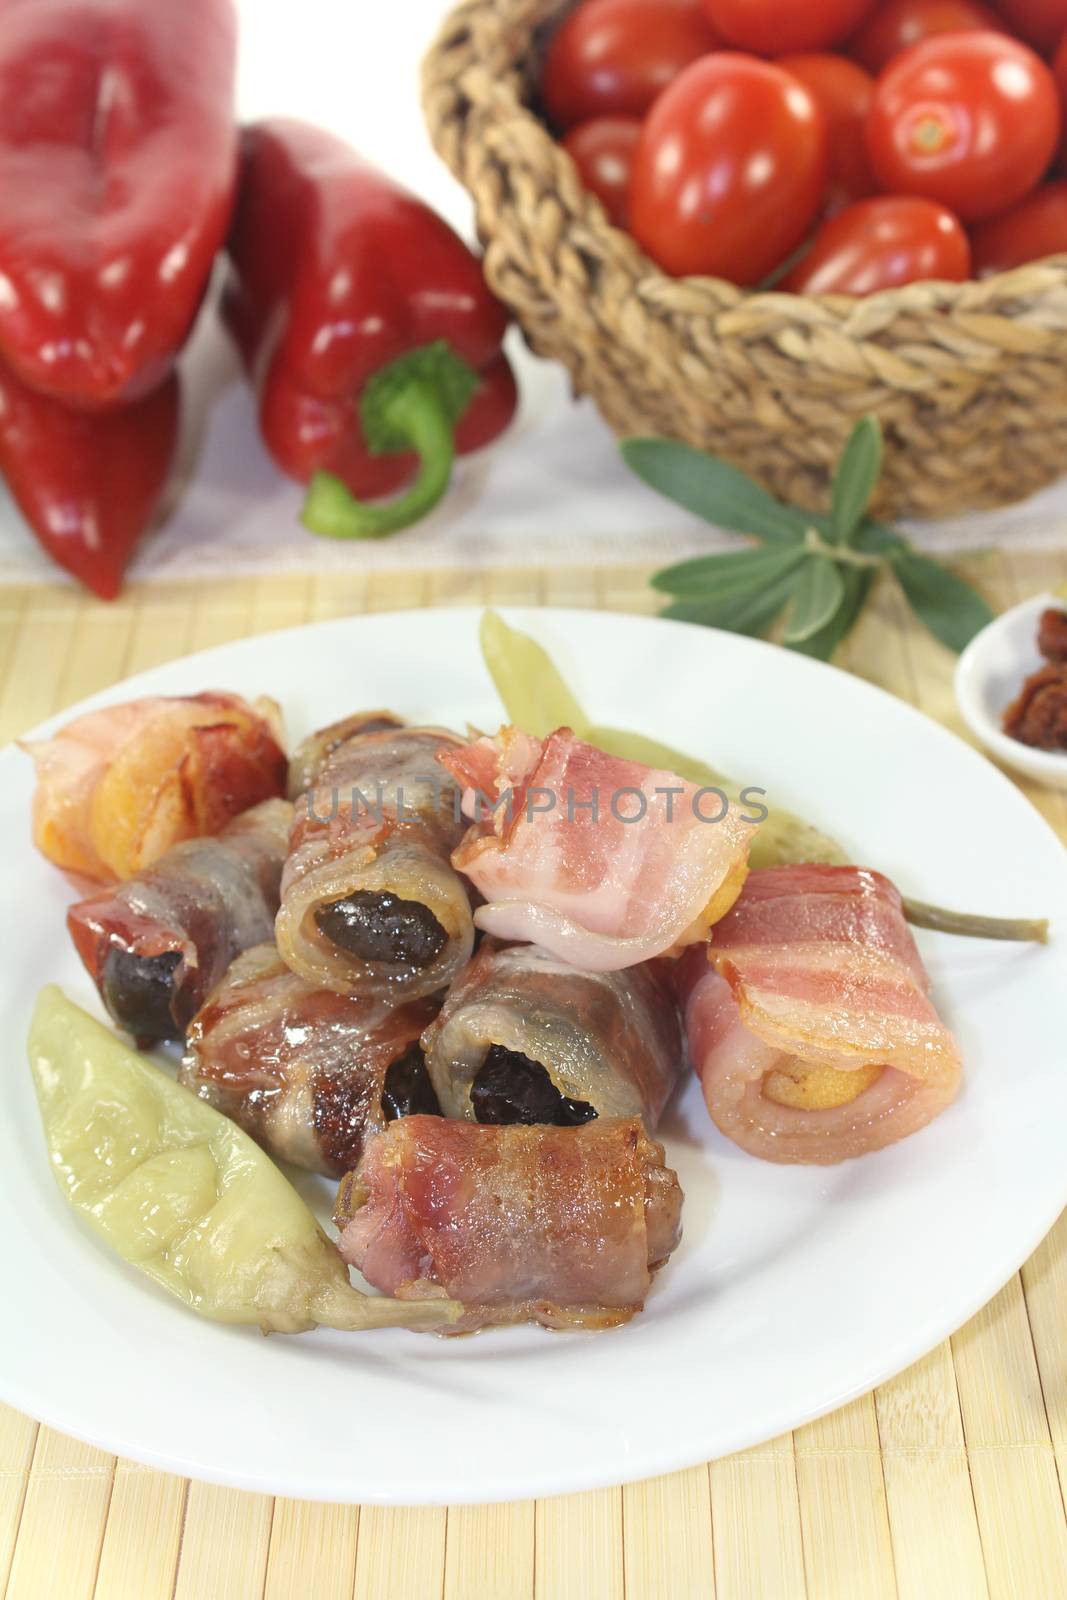 Tapas stuffed with prunes, figs and apricots on a light background